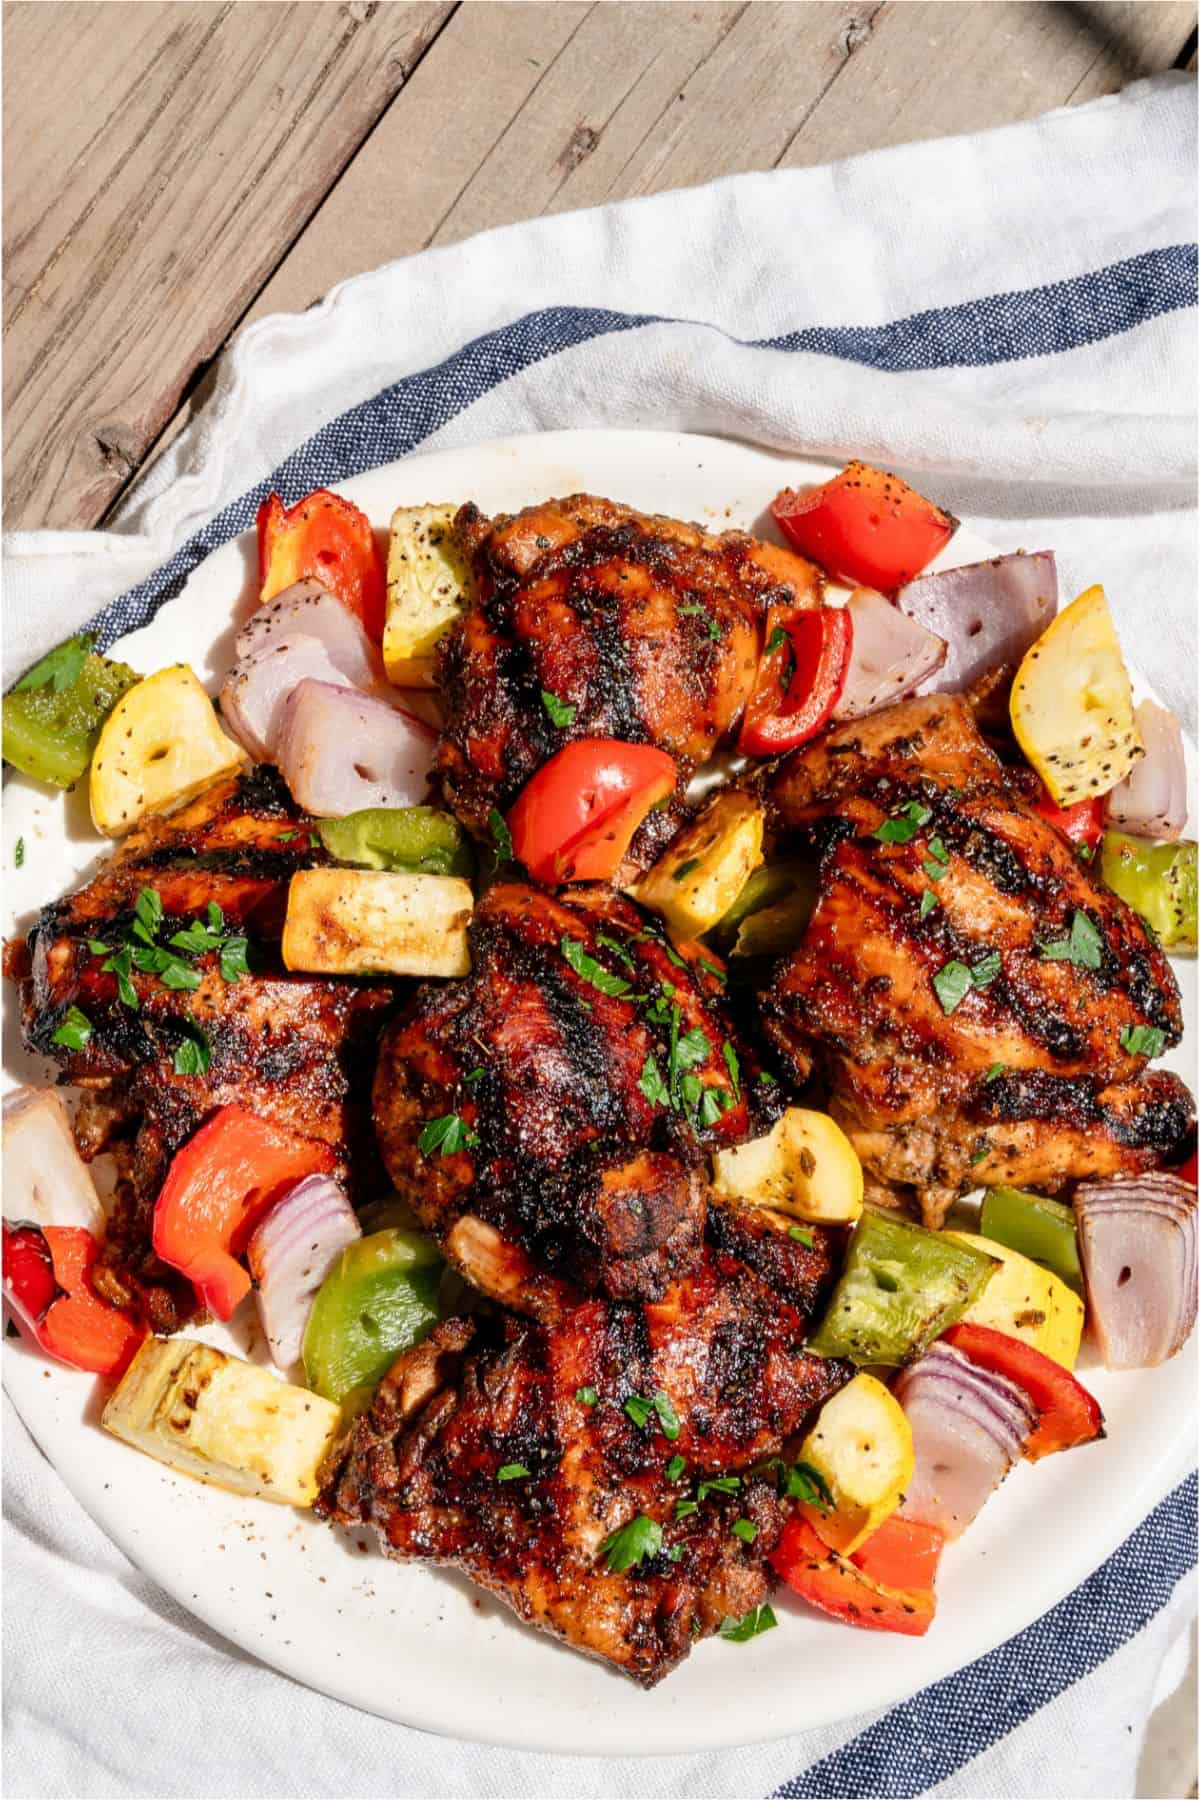 A plate of Grilled Boneless Chicken Thighs and Grilled veggies